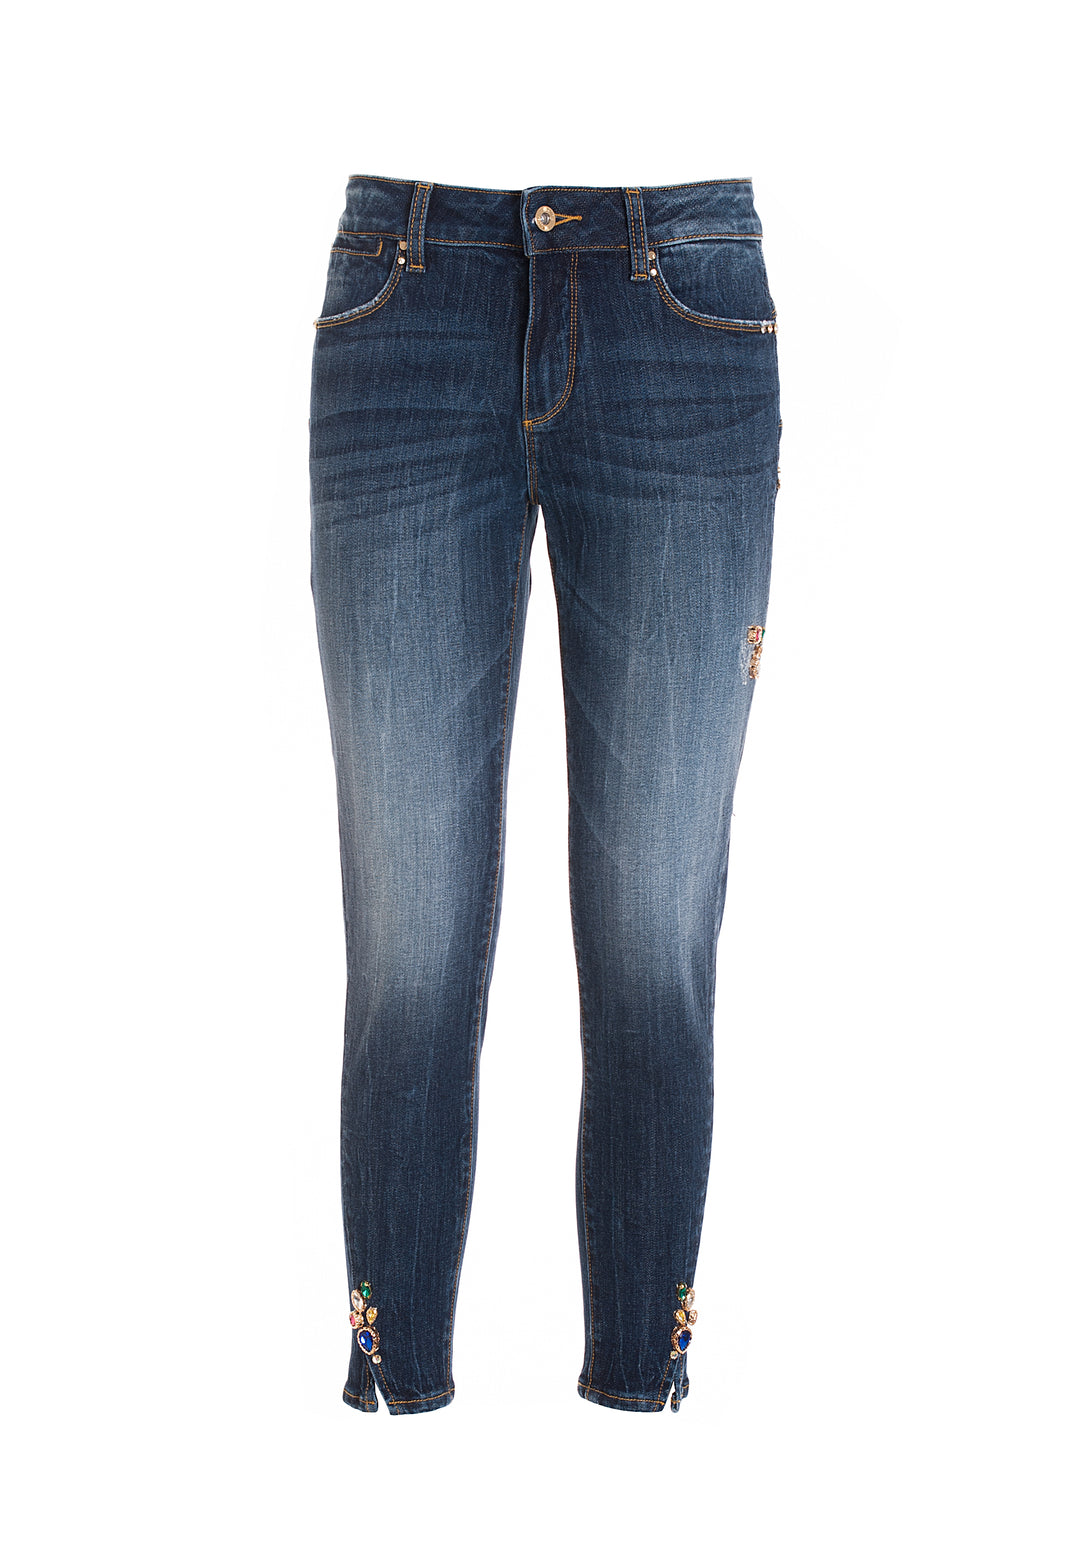 Jeans slim fit with shape-up effect made in denim with middle wash